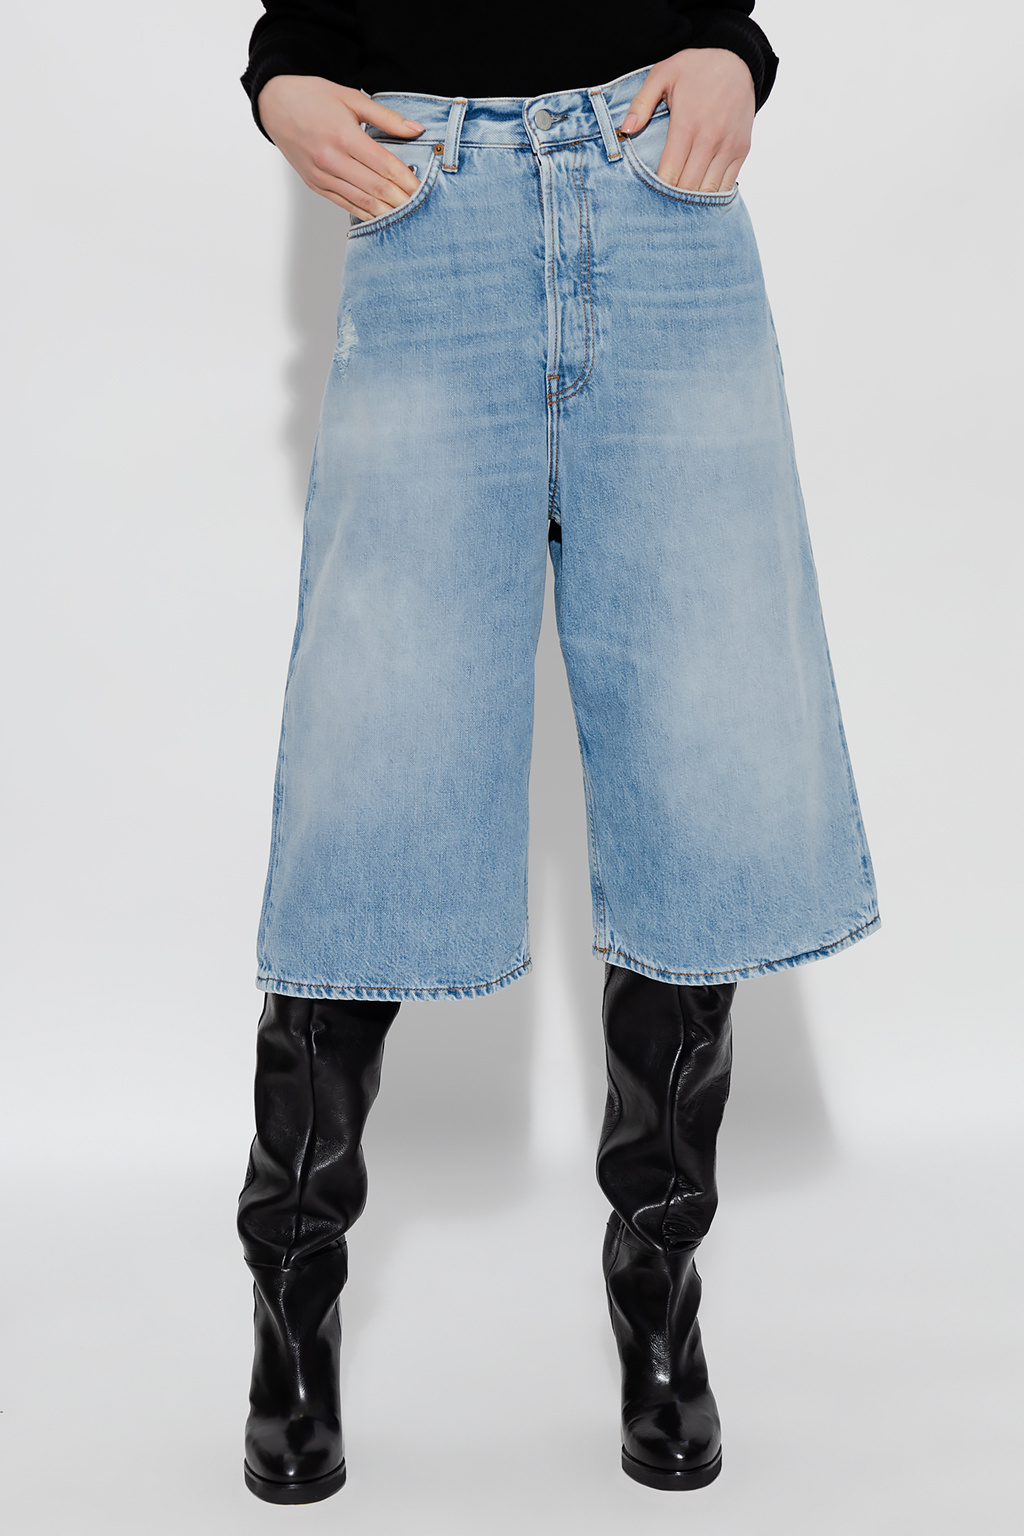 Acne Studios empire-line jeans with wide legs